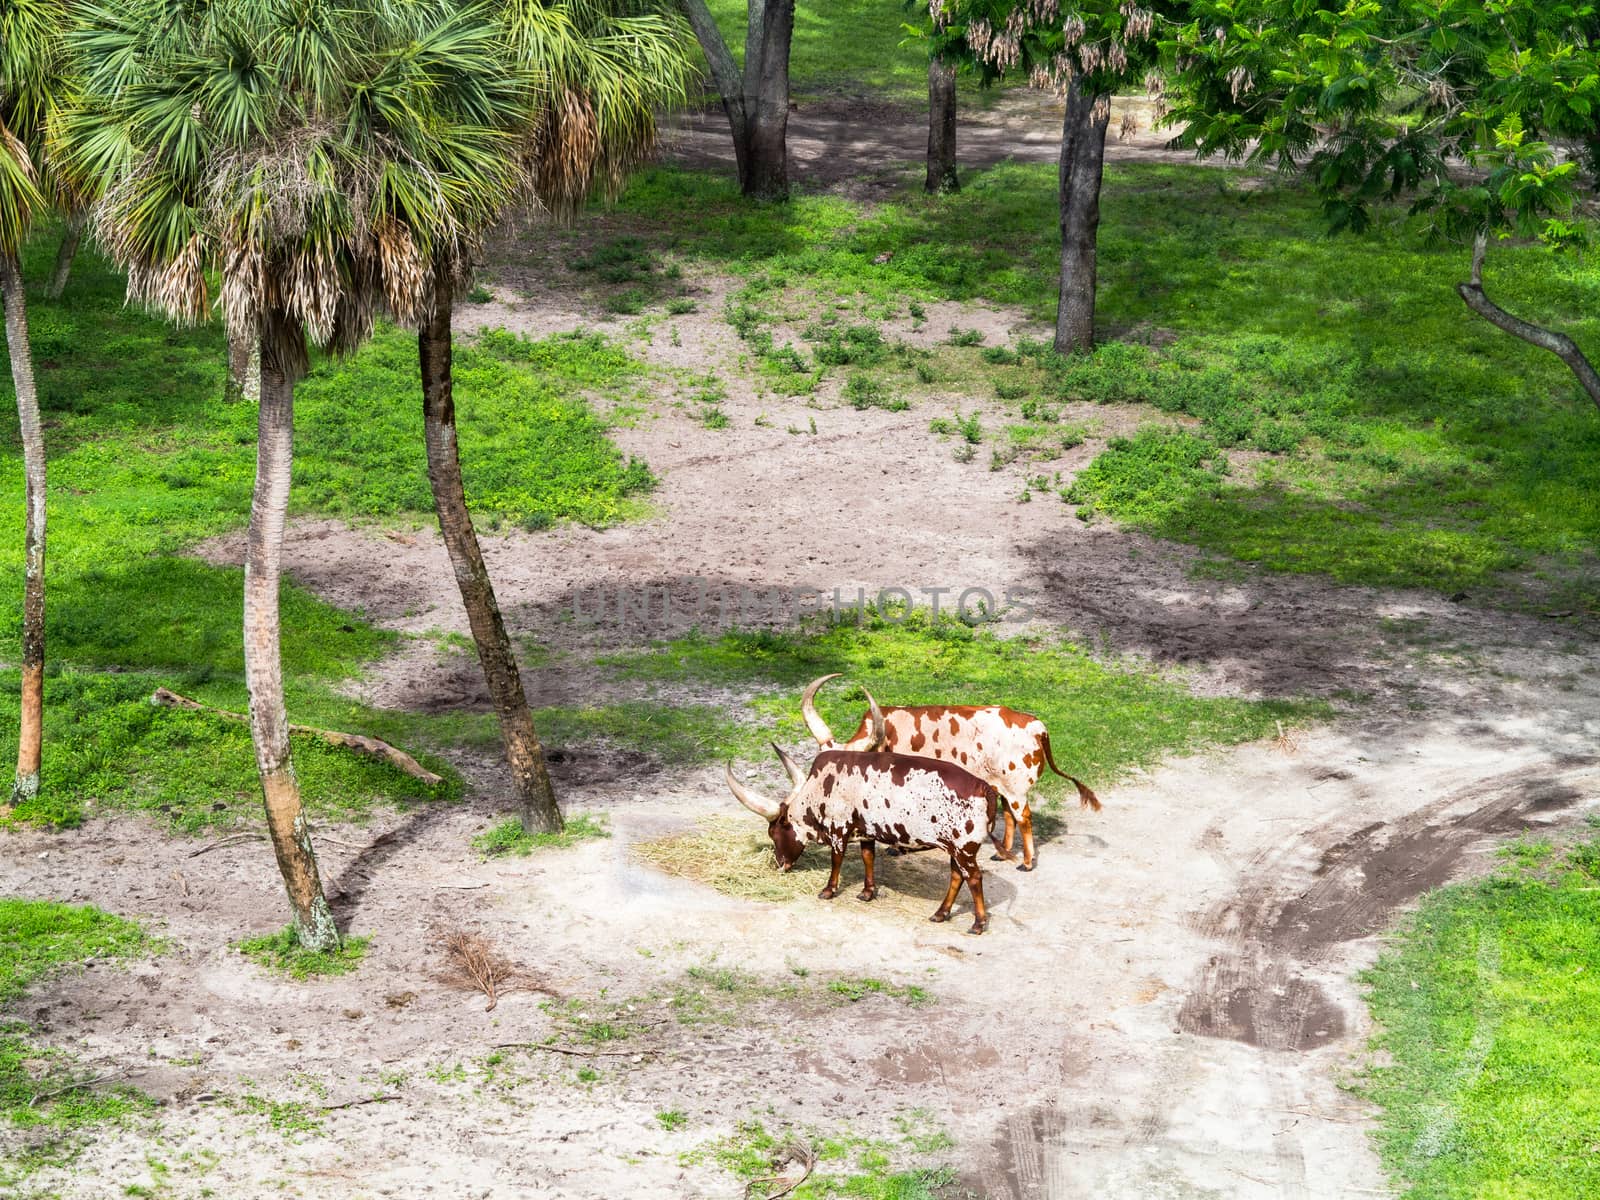 2 ankole cattle with grass and trees